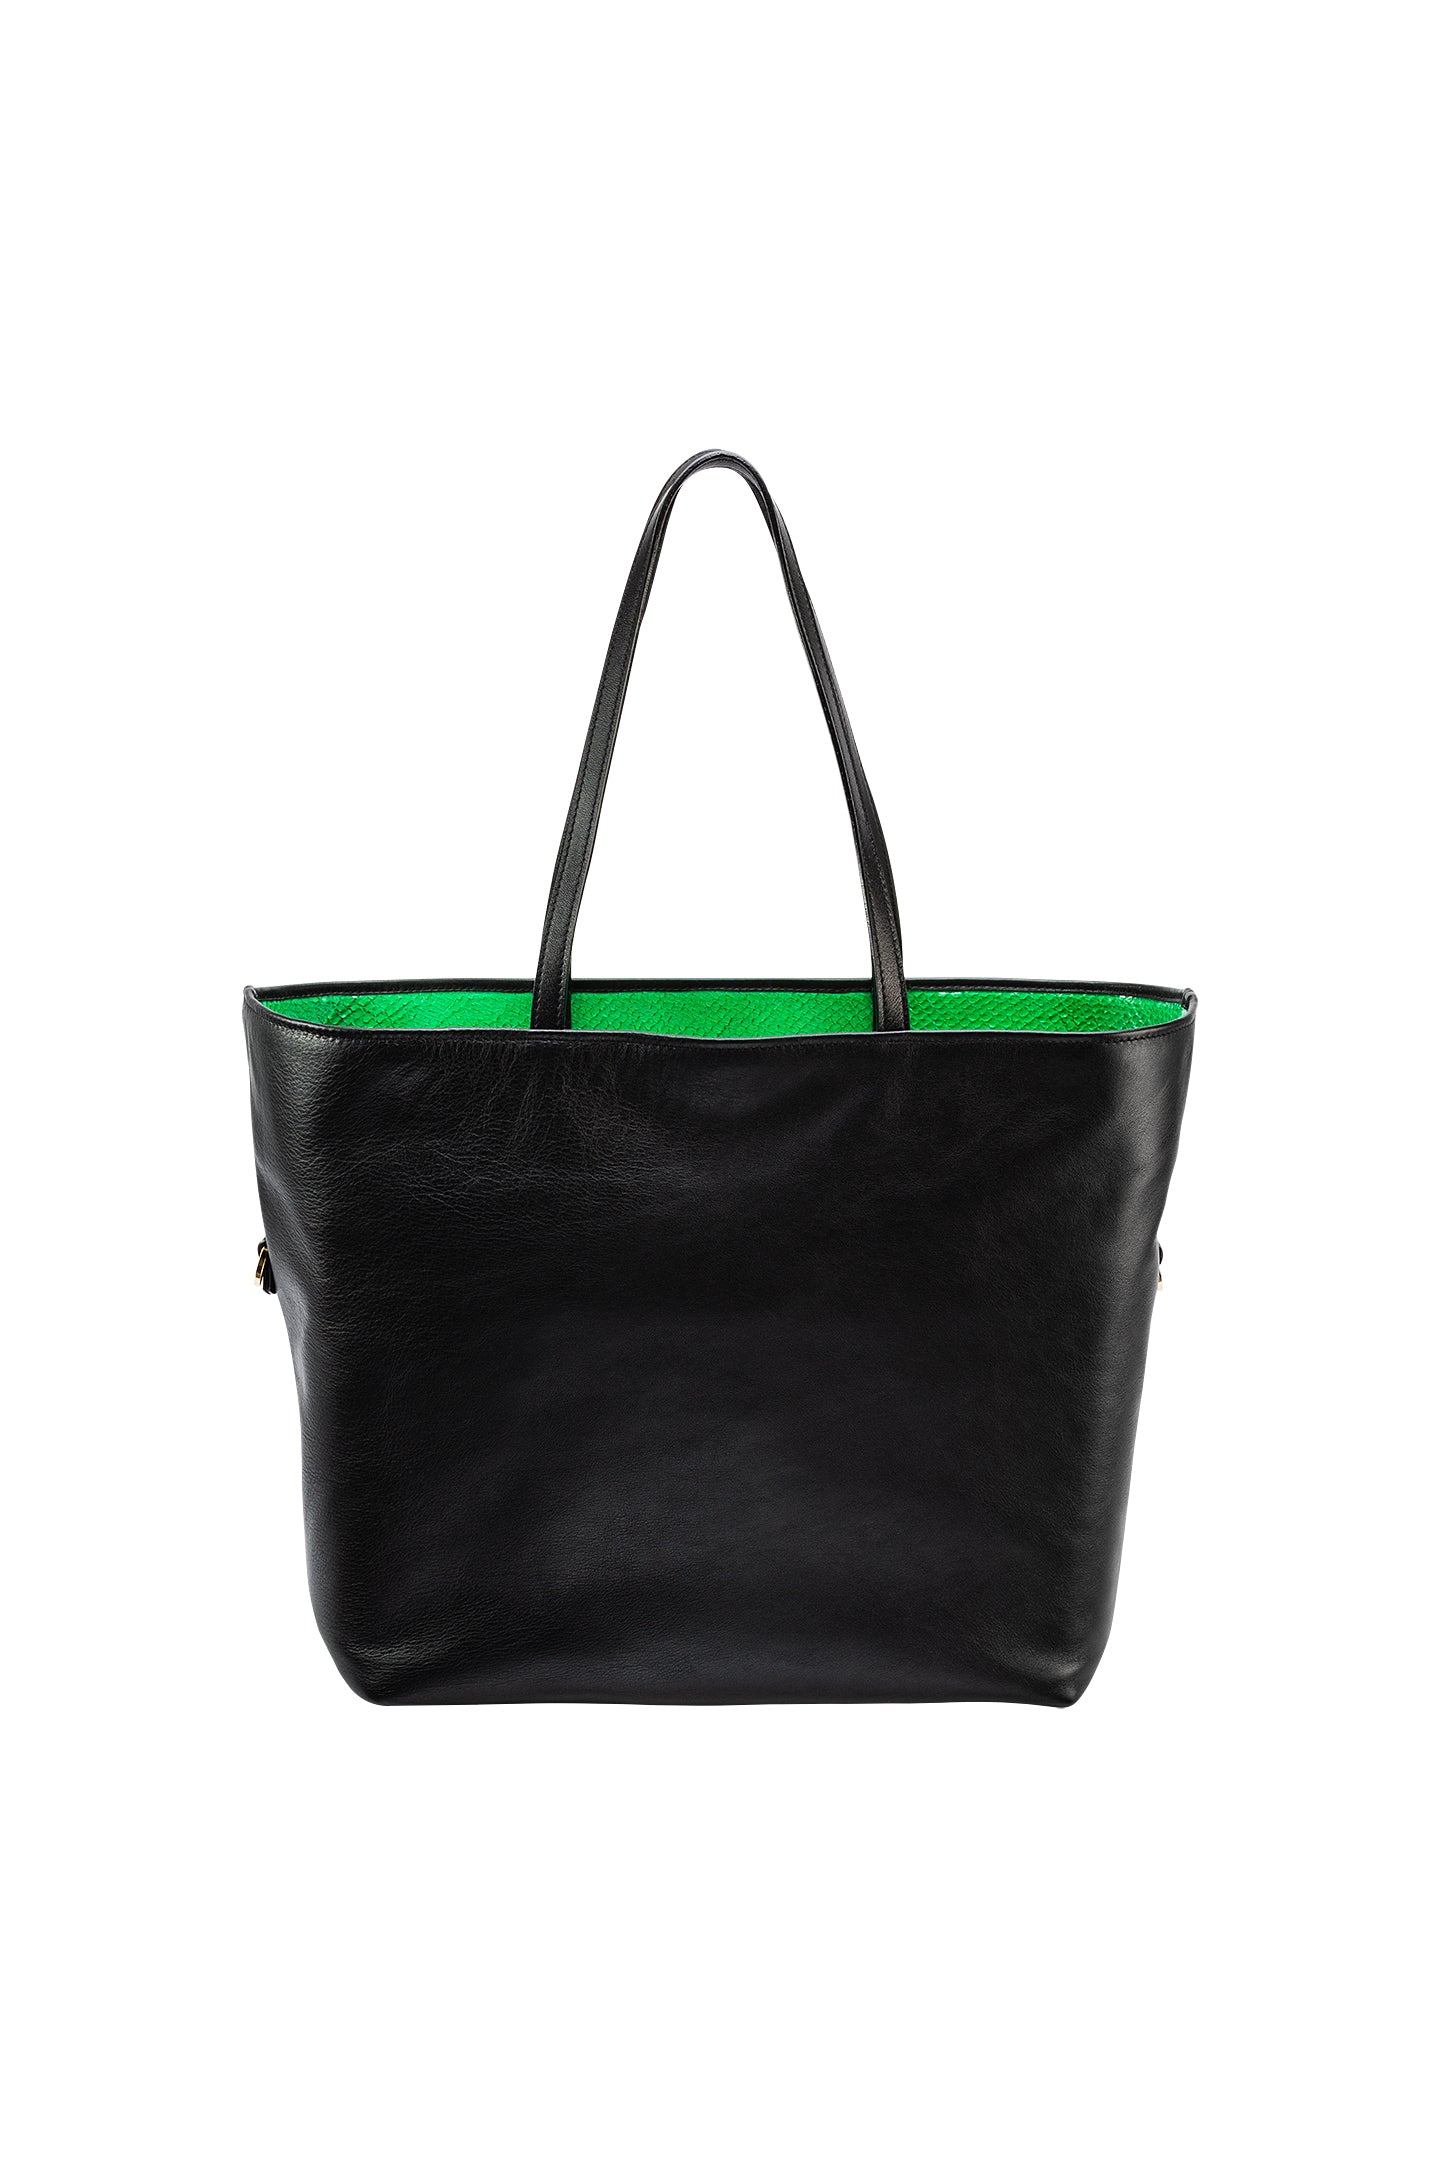 W Bag Black with green fish leather